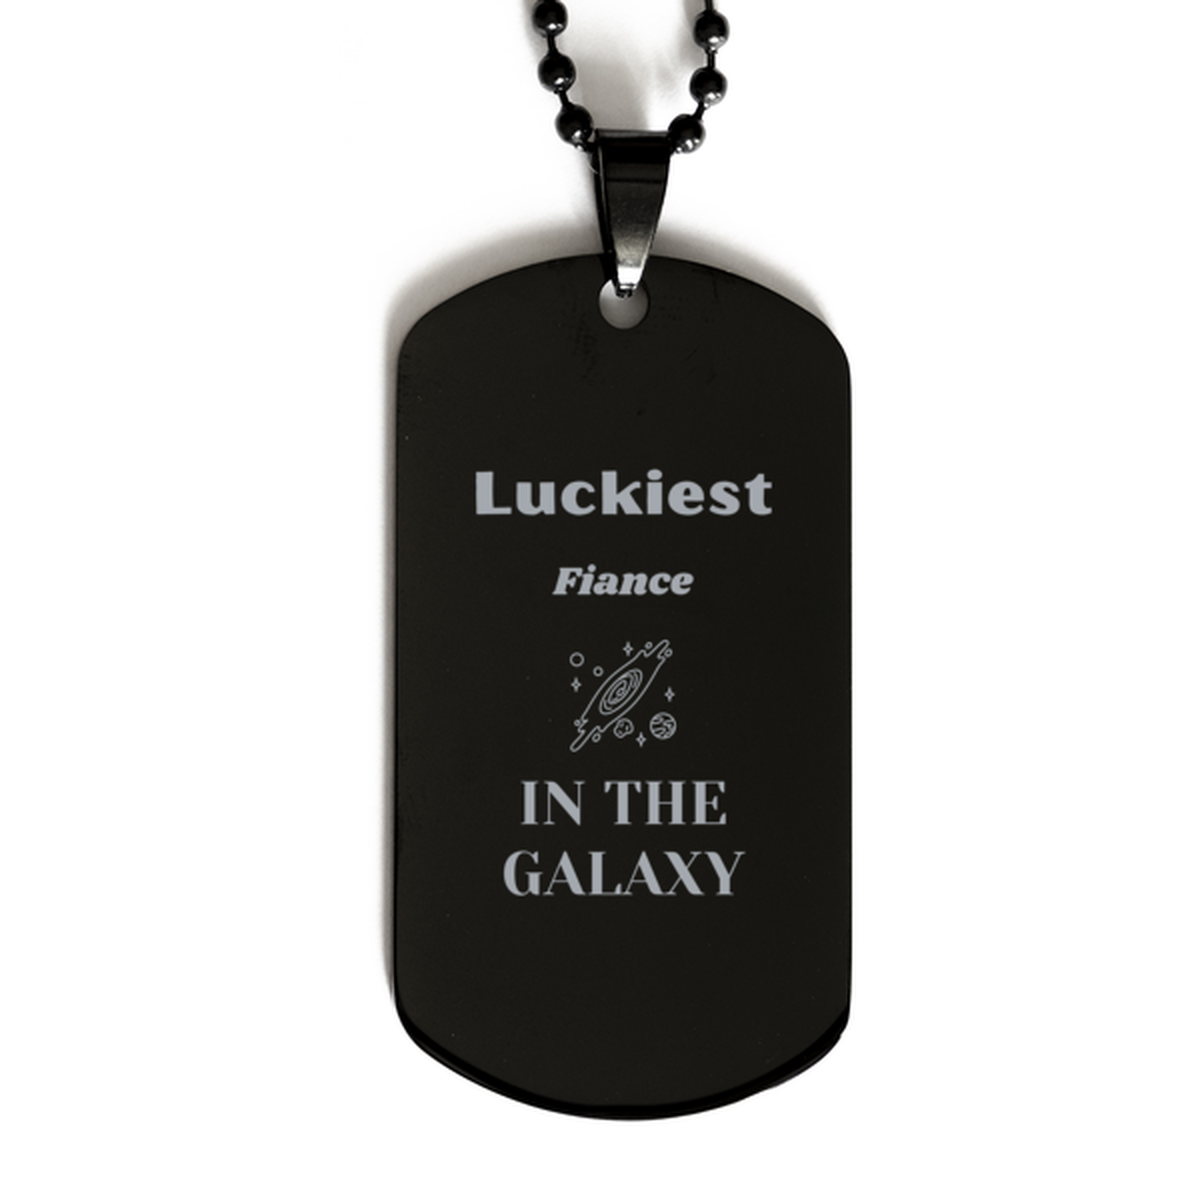 Luckiest Fiance in the Galaxy, To My Fiance Engraved Gifts, Christmas Fiance Black Dog Tag Gifts, X-mas Birthday Unique Gifts For Fiance Men Women